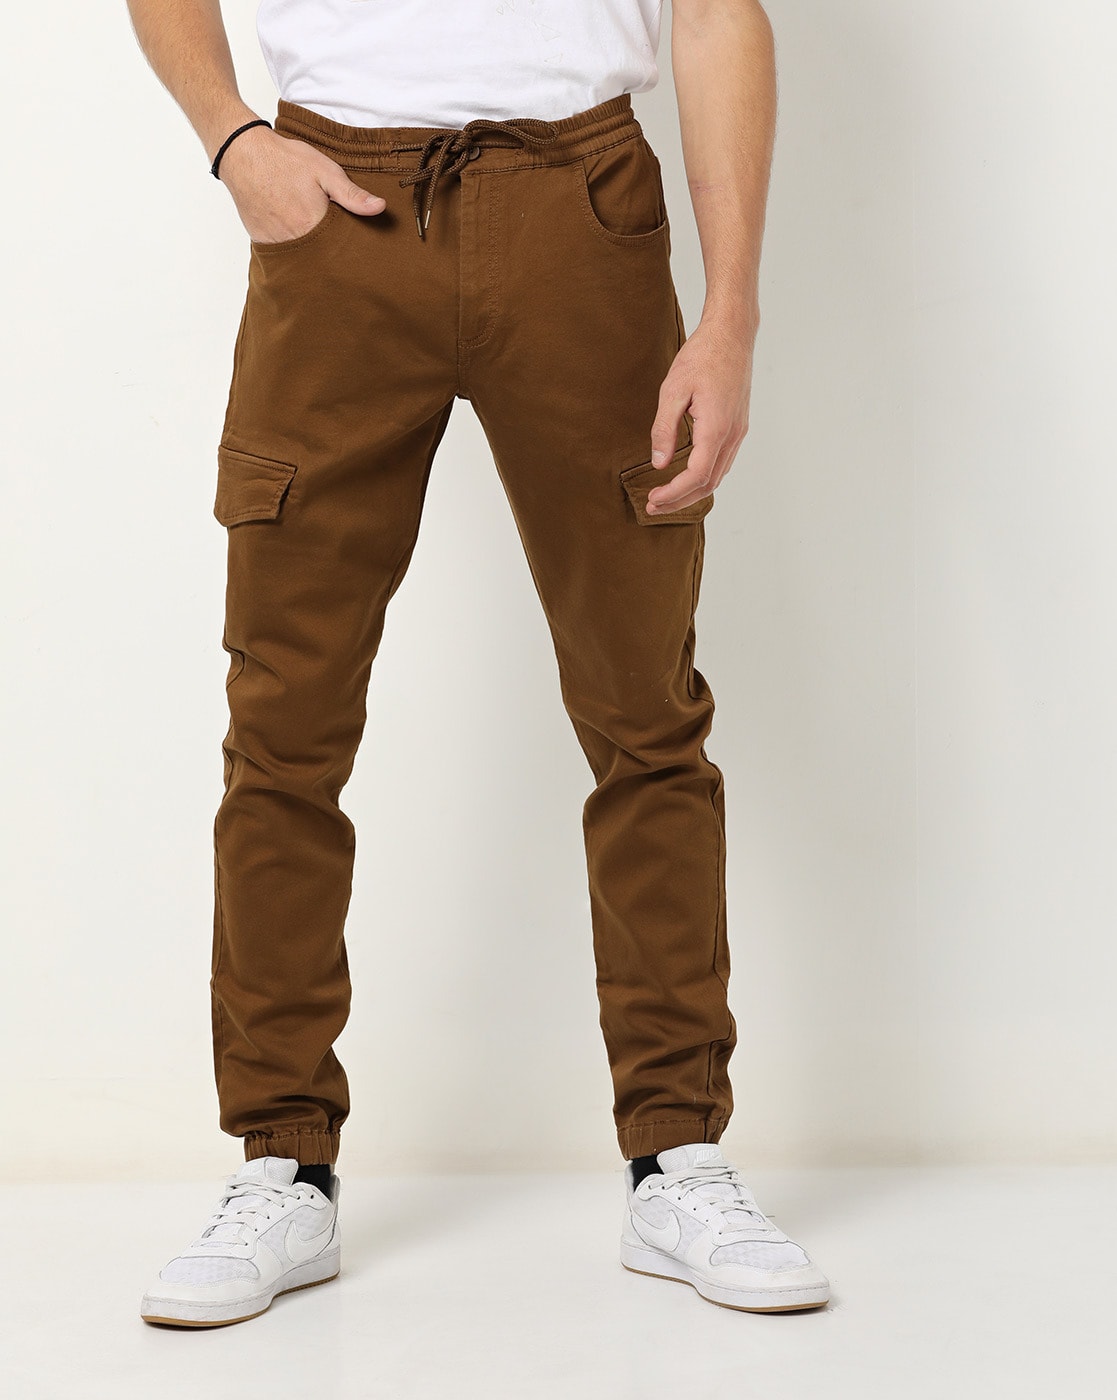 mens levi jeans with elastic waist